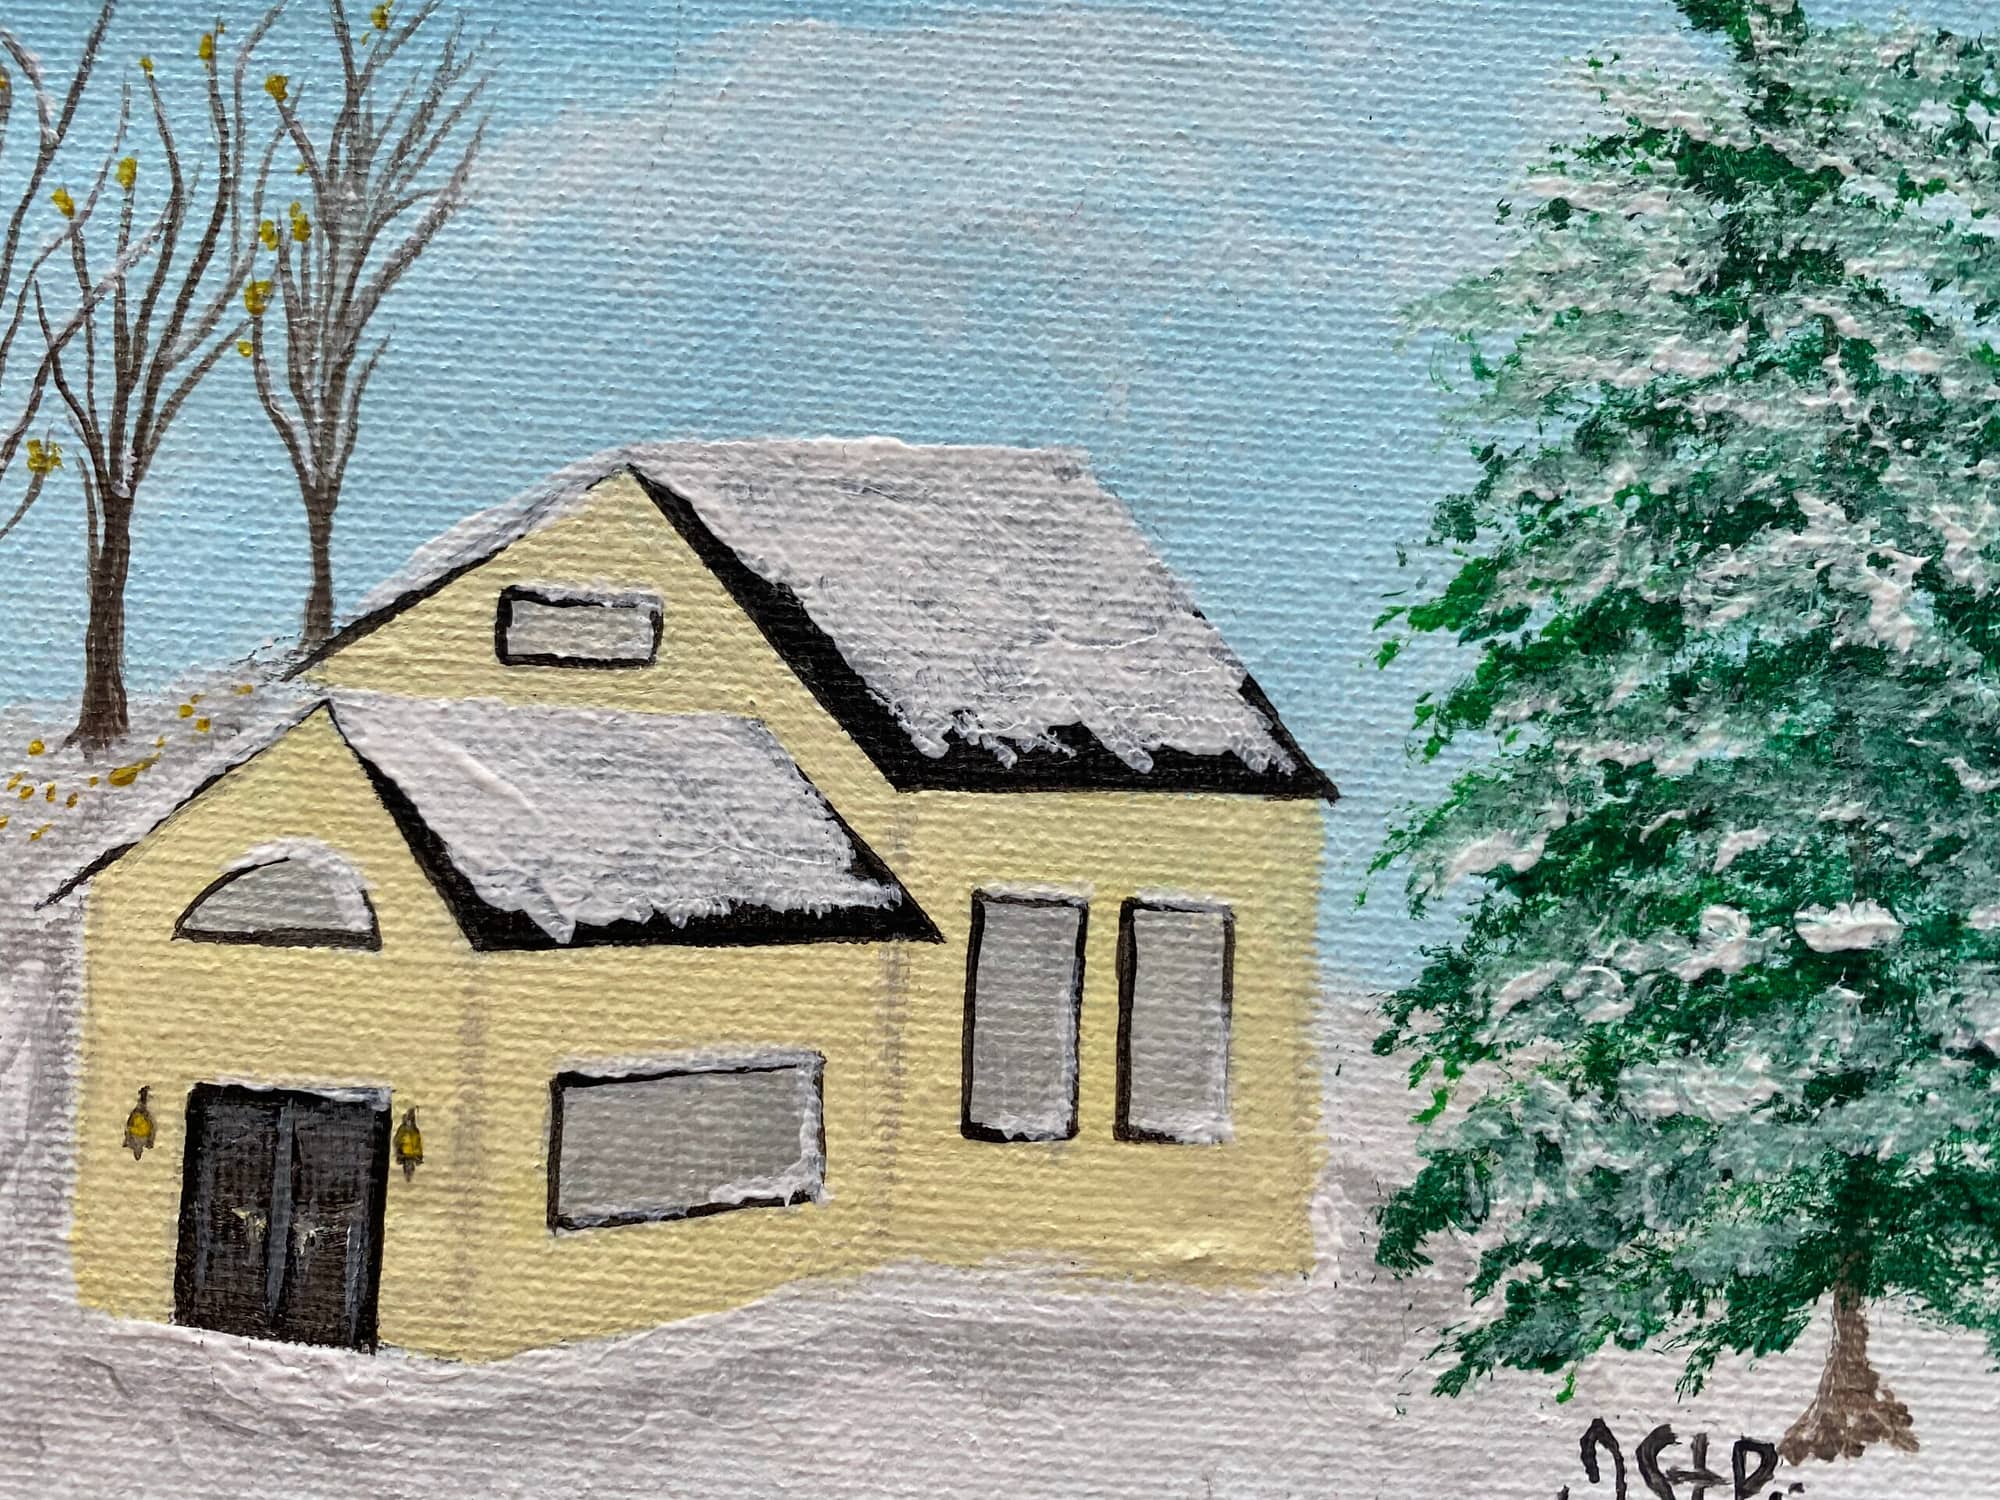 Small painting of a yellow house with trees in winter